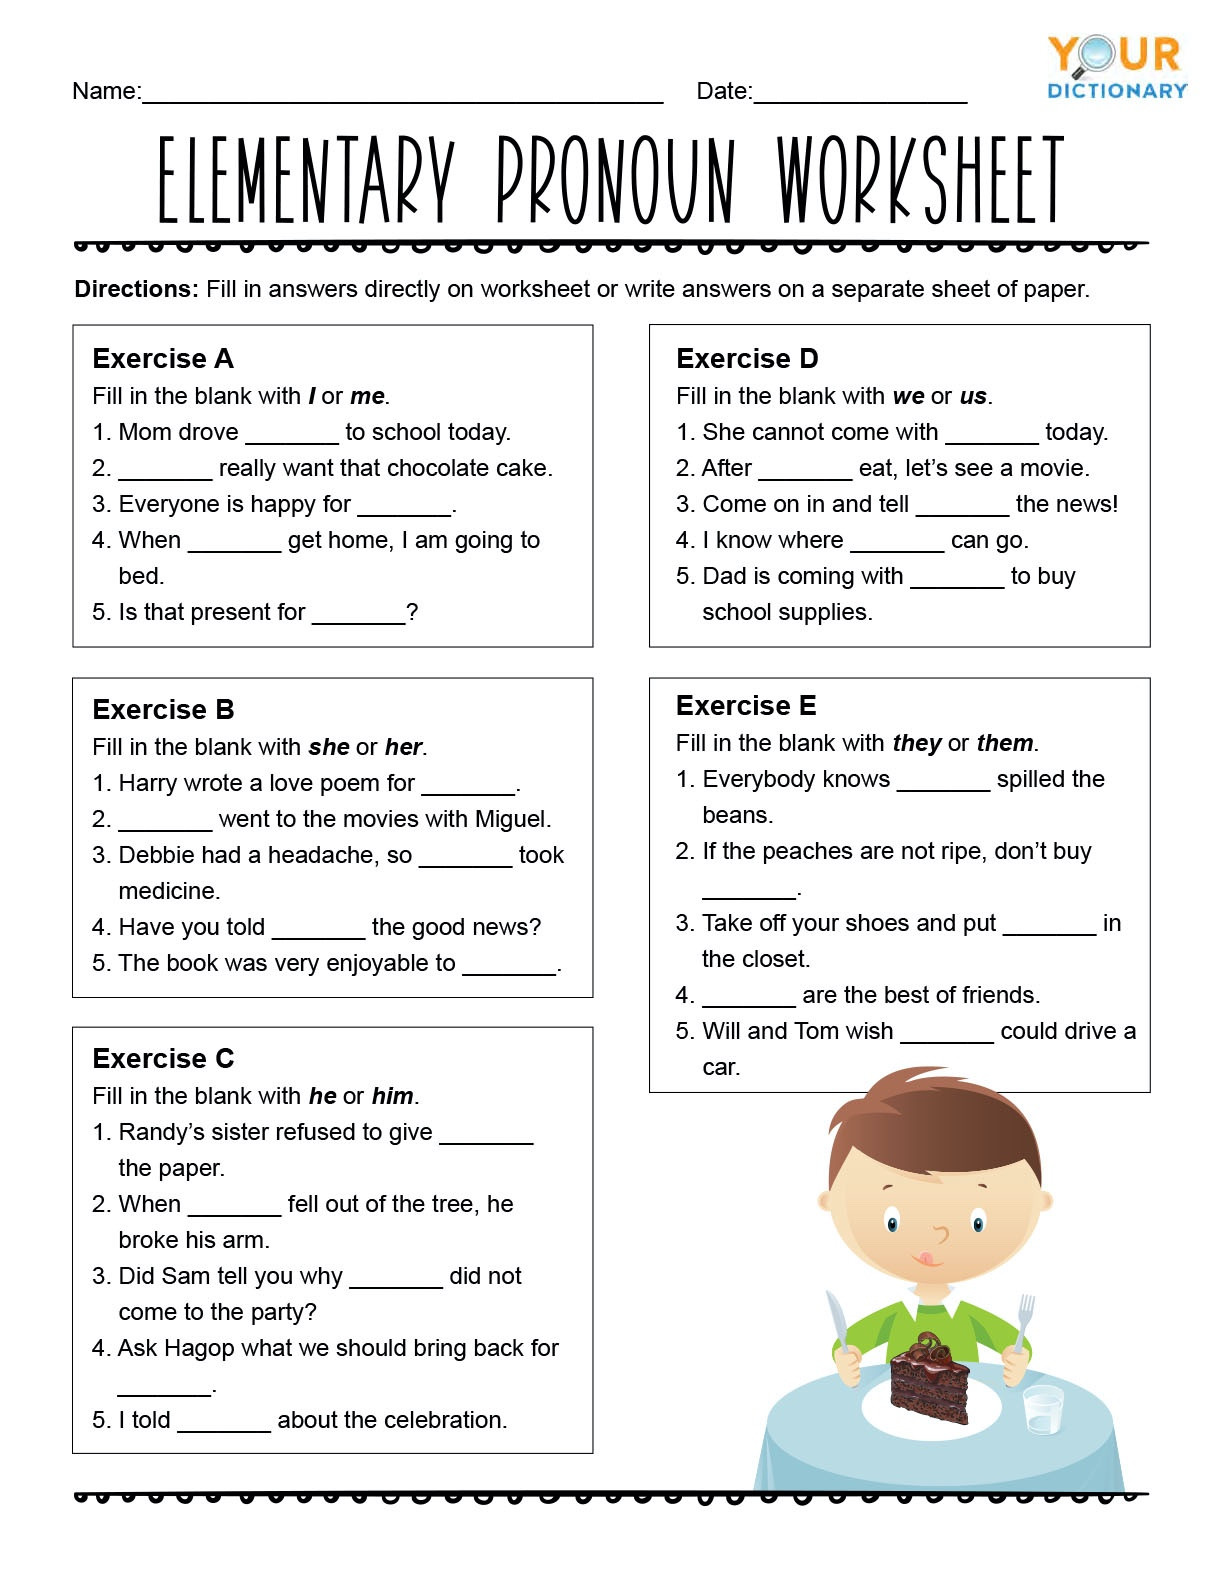 Pronouns Worksheets 5th Grade Pronoun Worksheets for Practice and Review